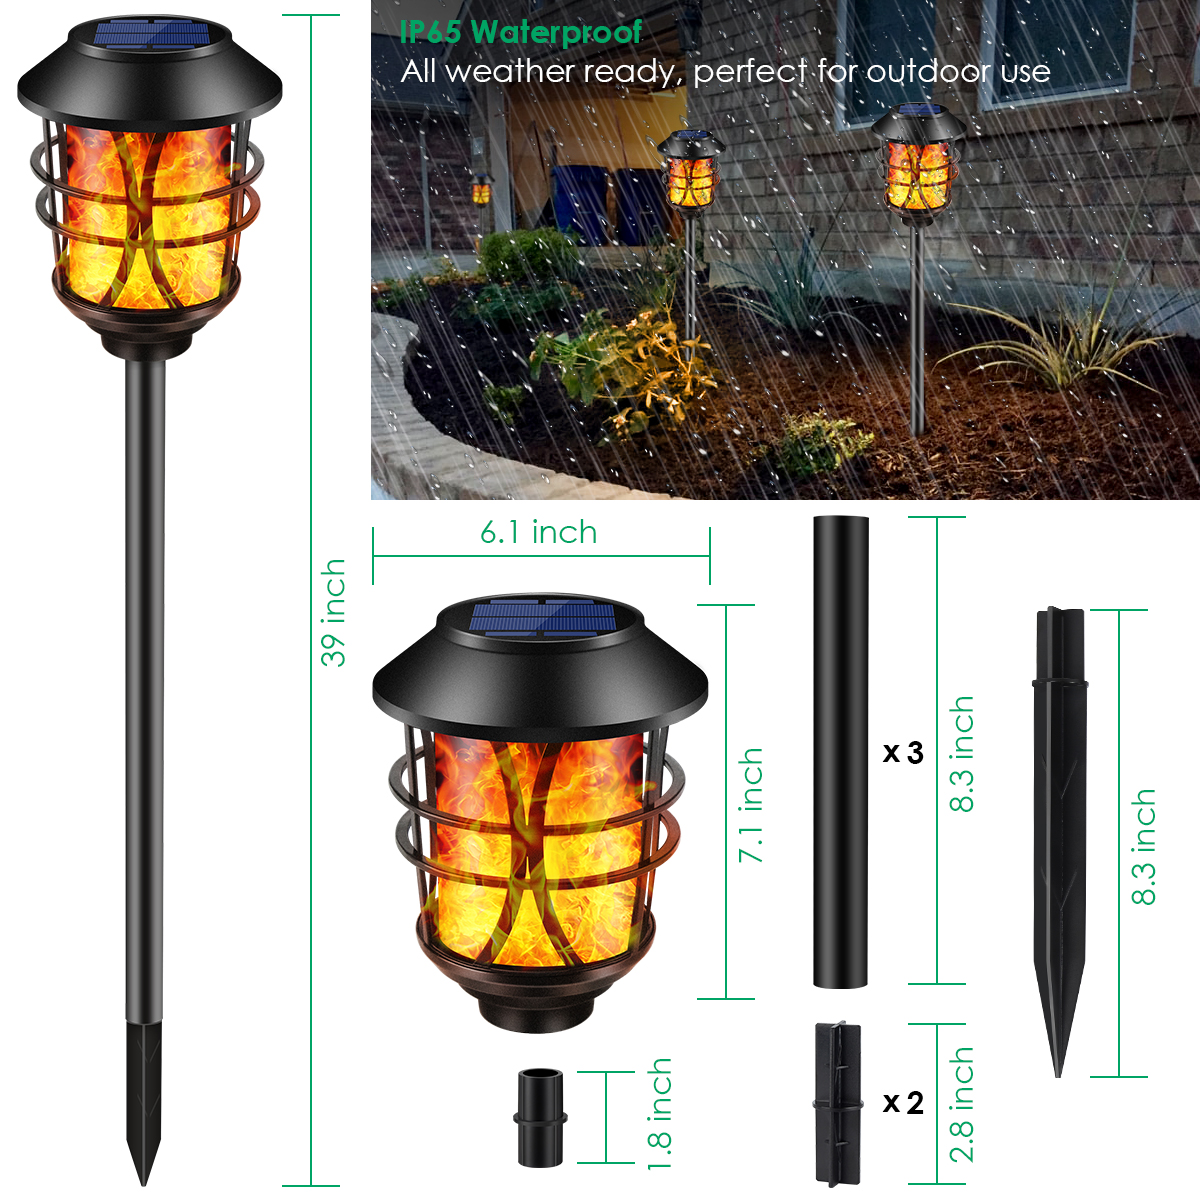 TomCare Solar Lights Metal Flickering Flame Solar Torches Lights Waterproof Outdoor Heavy Duty Lighting Solar Pathway Lights Landscape Lighting Dusk to Dawn Auto On/Off for Garden Patio Yard, 4 Pack